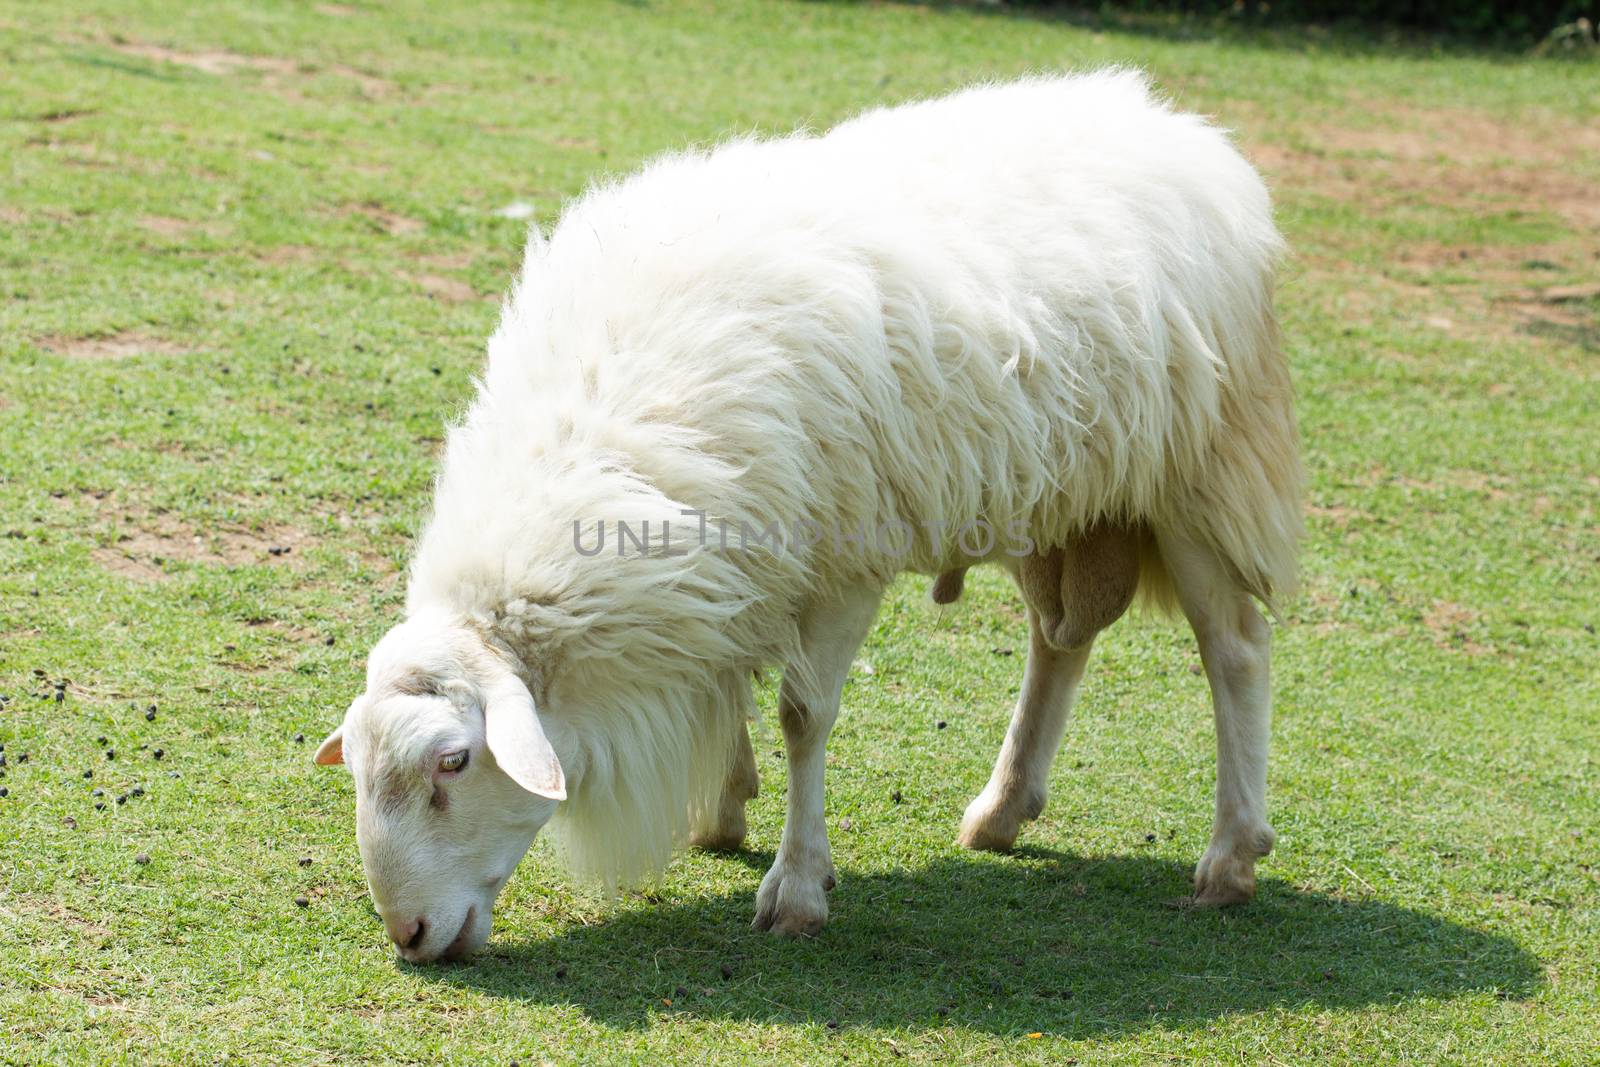 White Woolly Sheep Grazing in a field in Thailand